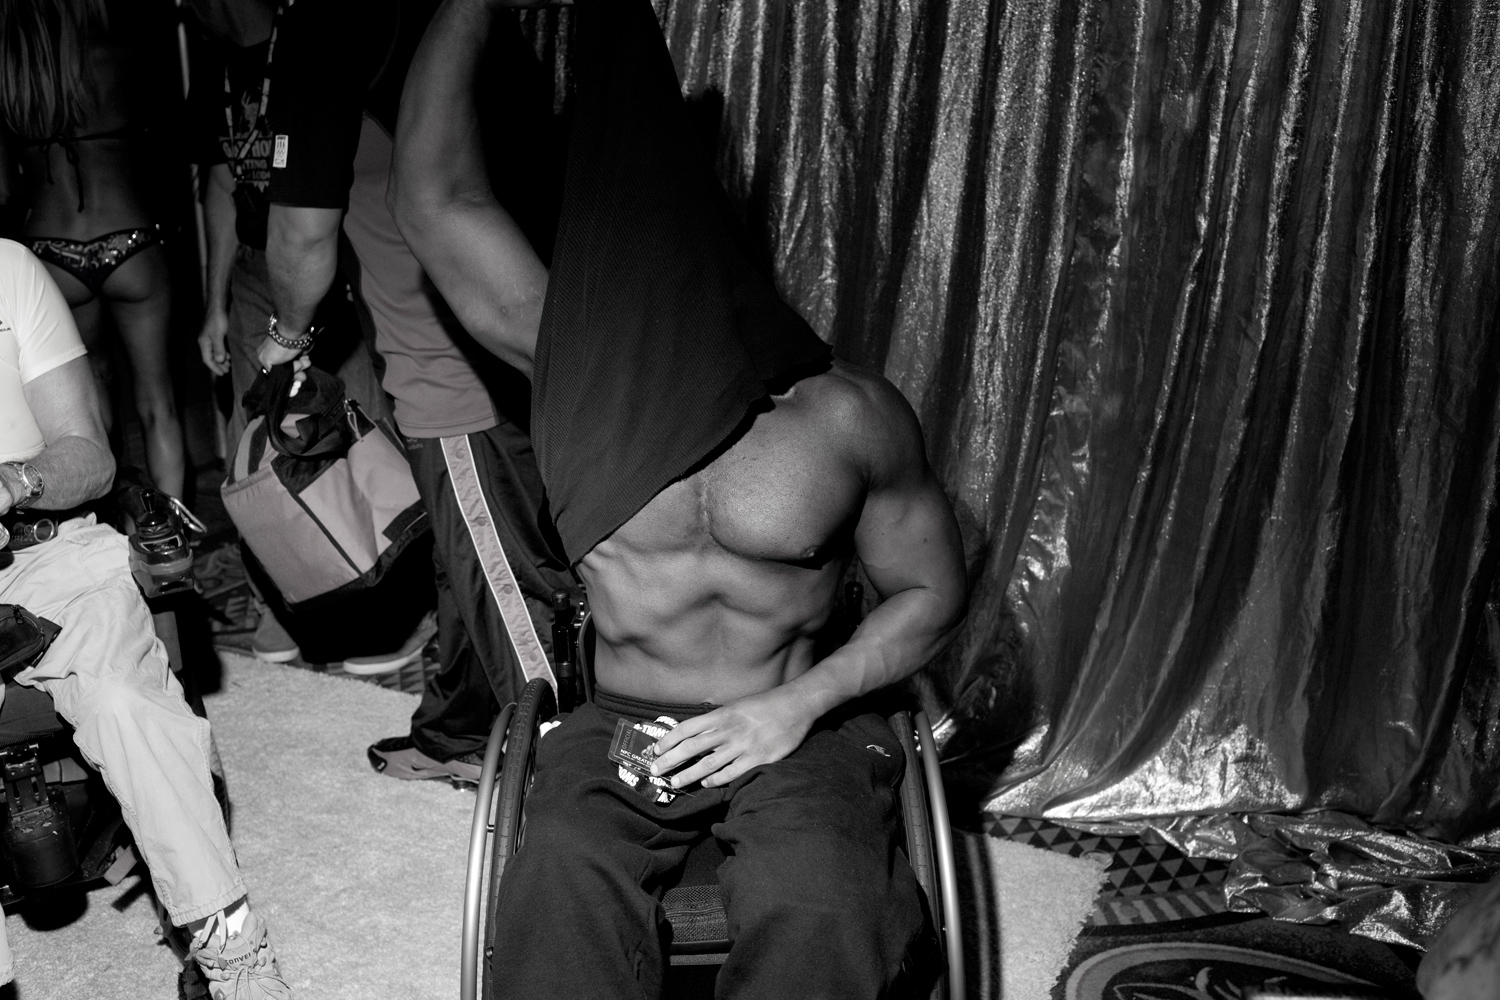 Roger Espina removes his shirt backstage in Metairie, La. Espina credits his interest in bodybuilding to a family friend who gave him a book about Arnold Schwarzenegger.